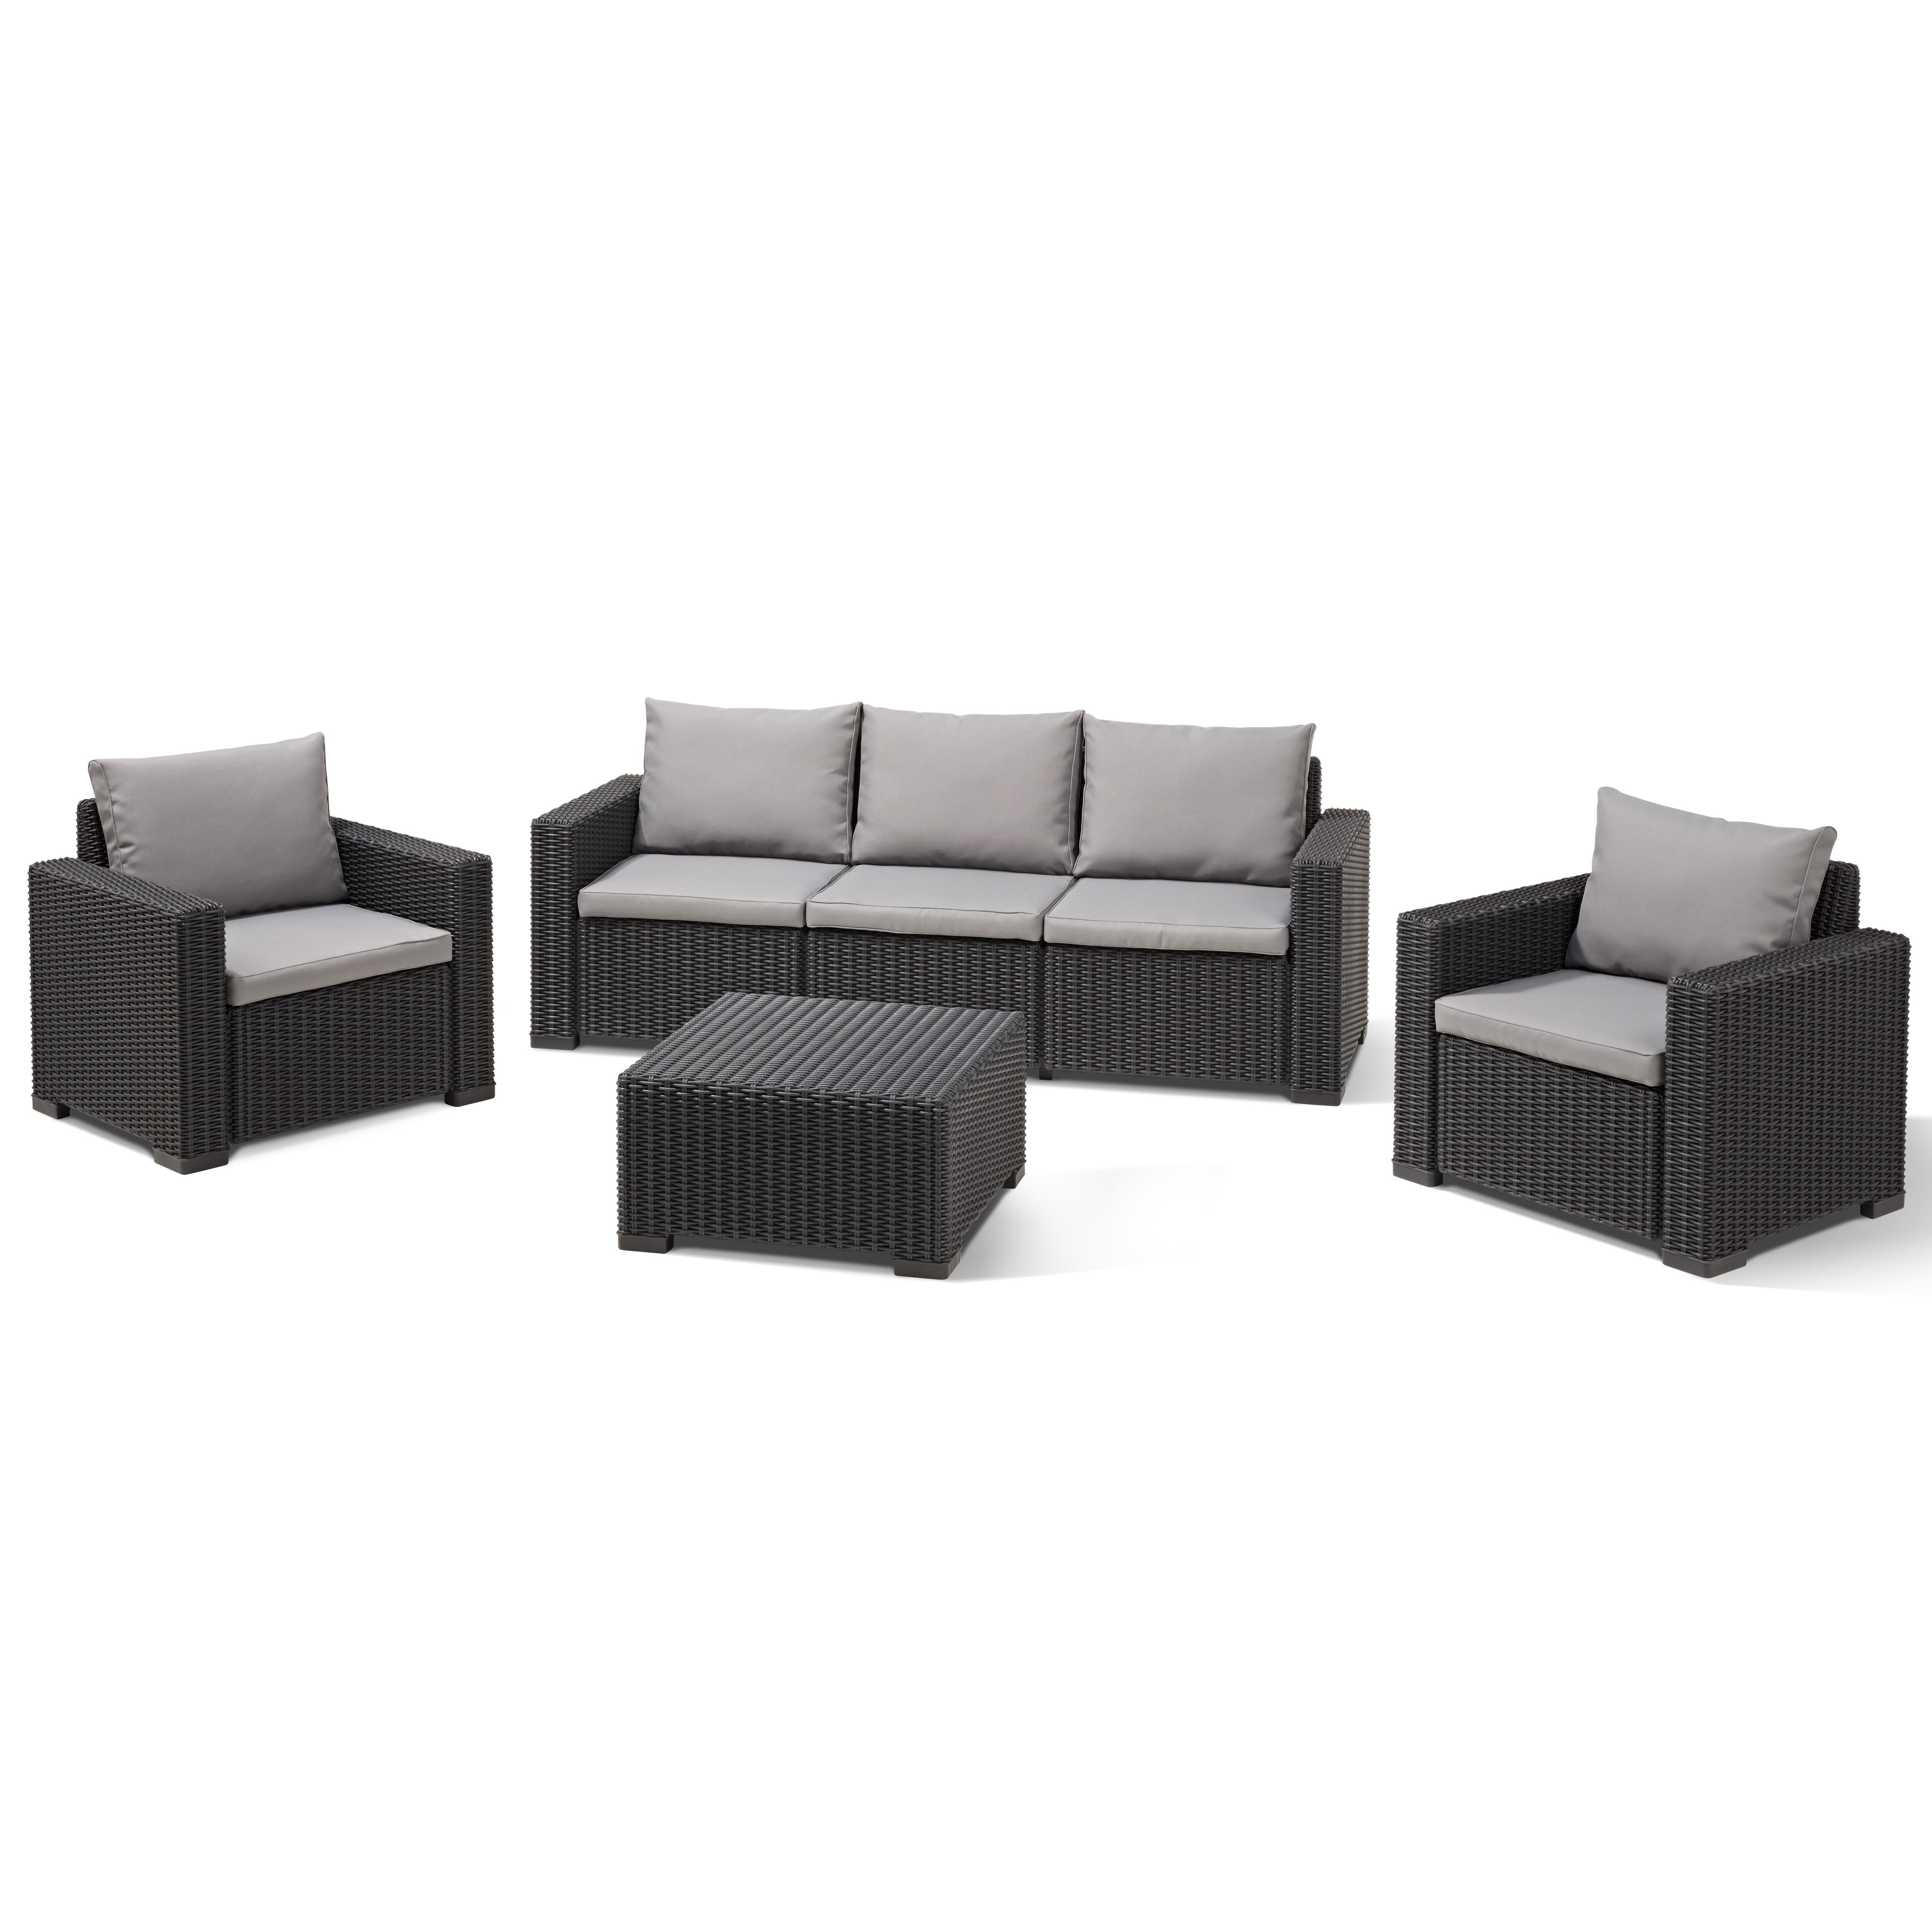 Keter California Graphite 5 Seater Garden furniture set with Coffee table